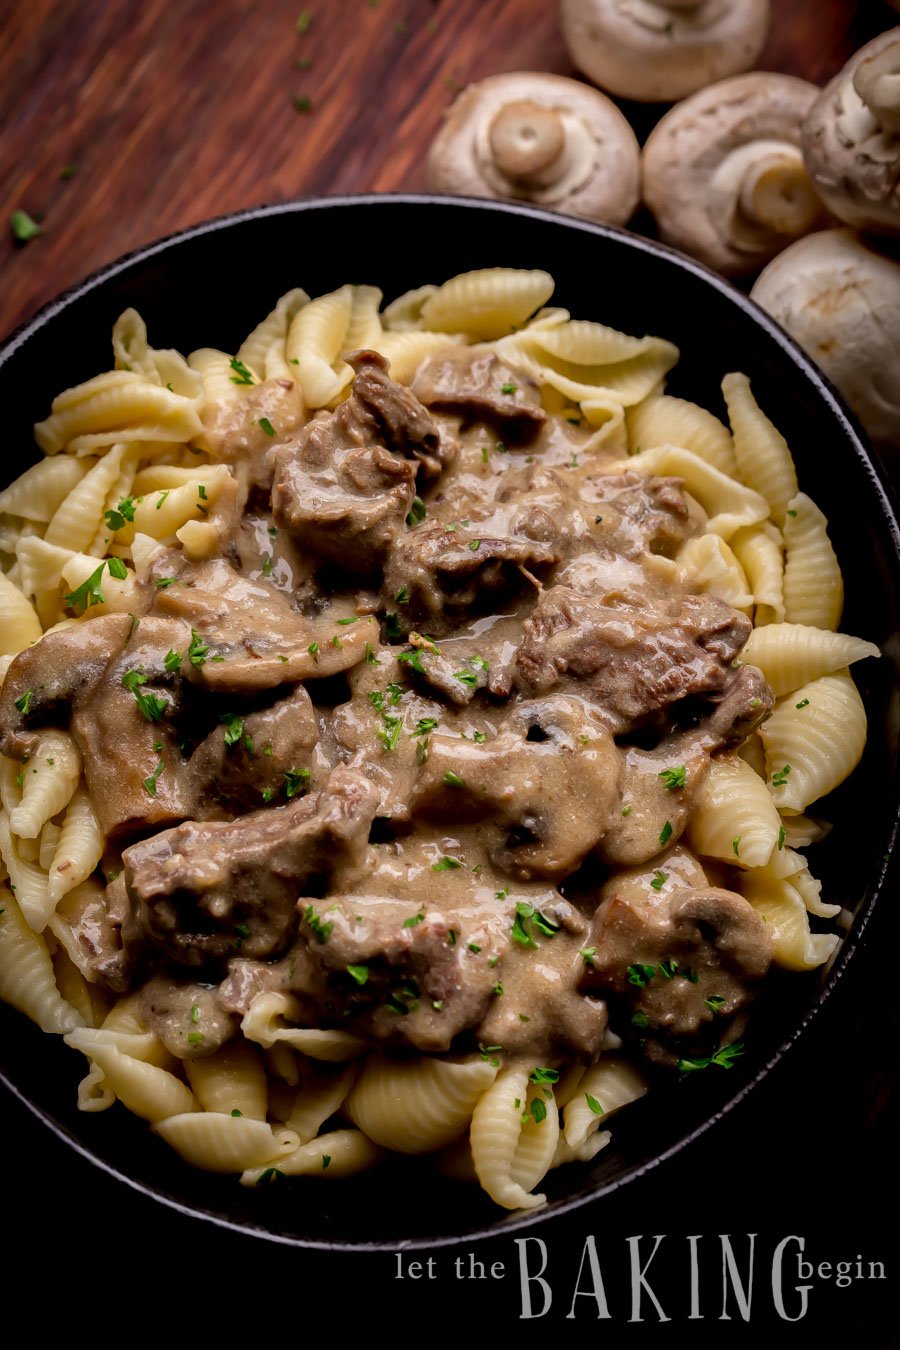 Beef stroganoff topped with fresh greens in a black bowl on a wooden table sided with mushrooms. 